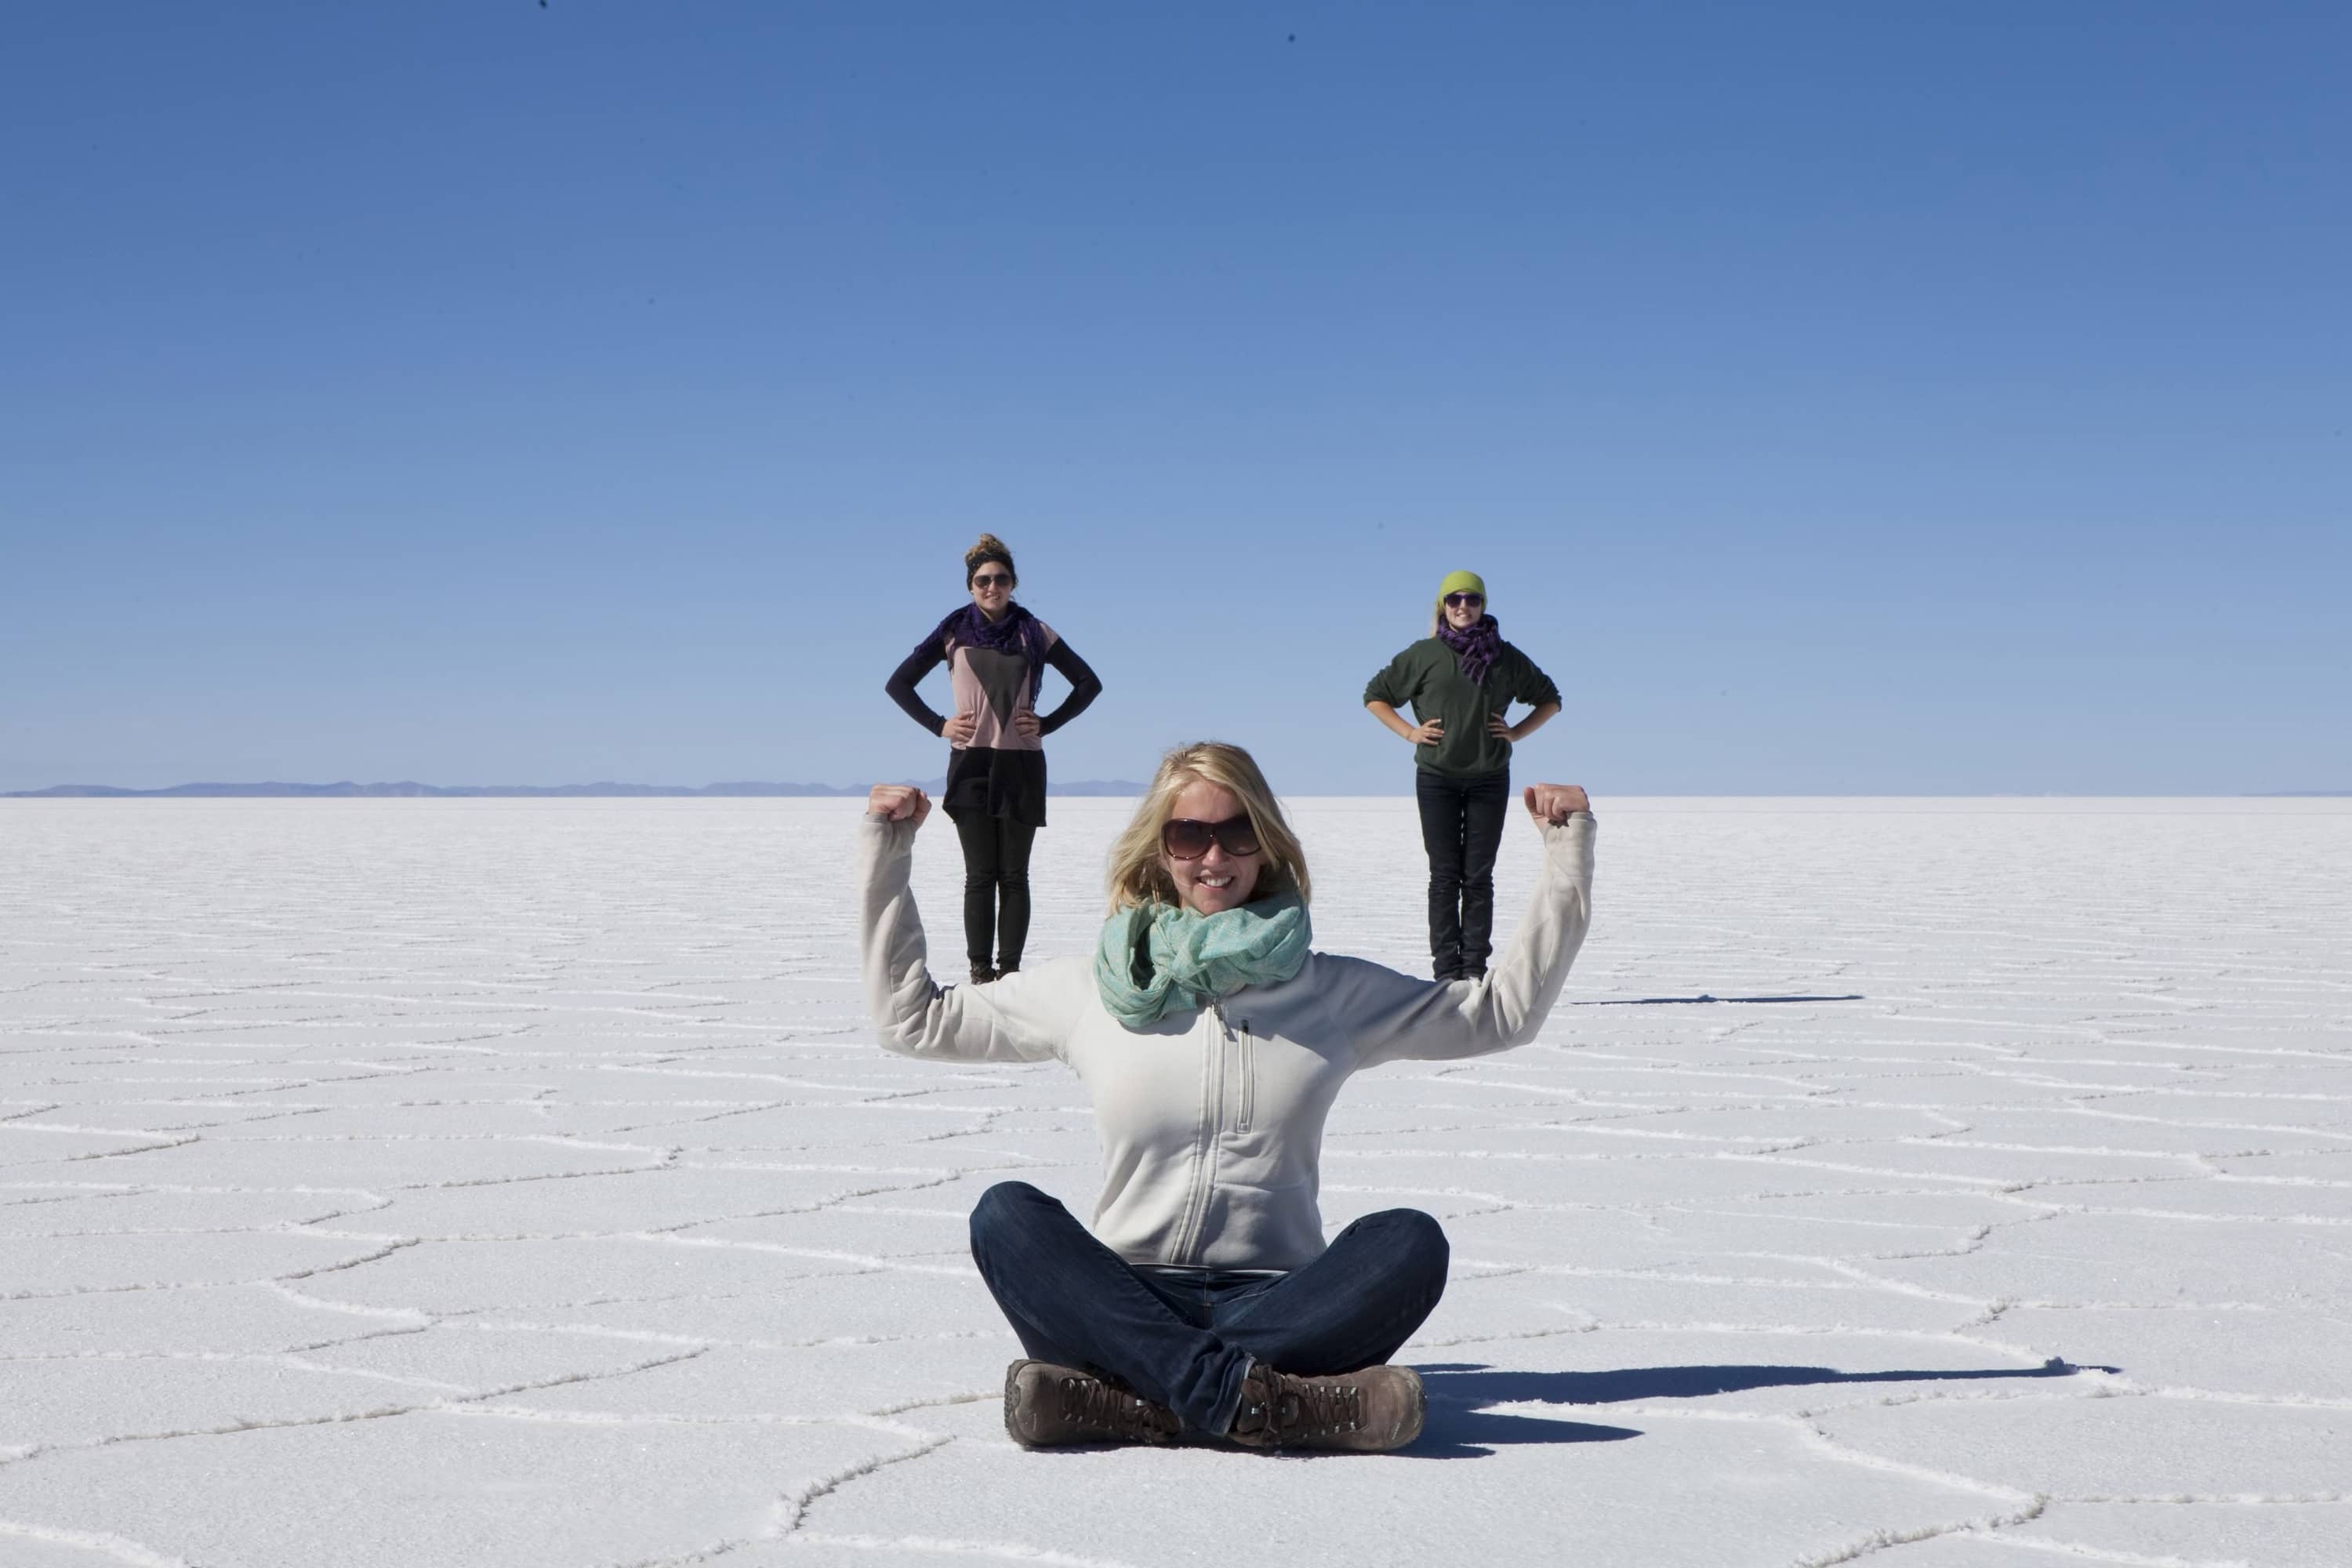 A photo of a woman balancing two friends on her biceps taken using forced perspective in the Uyuni Salt Flats in Bolivia